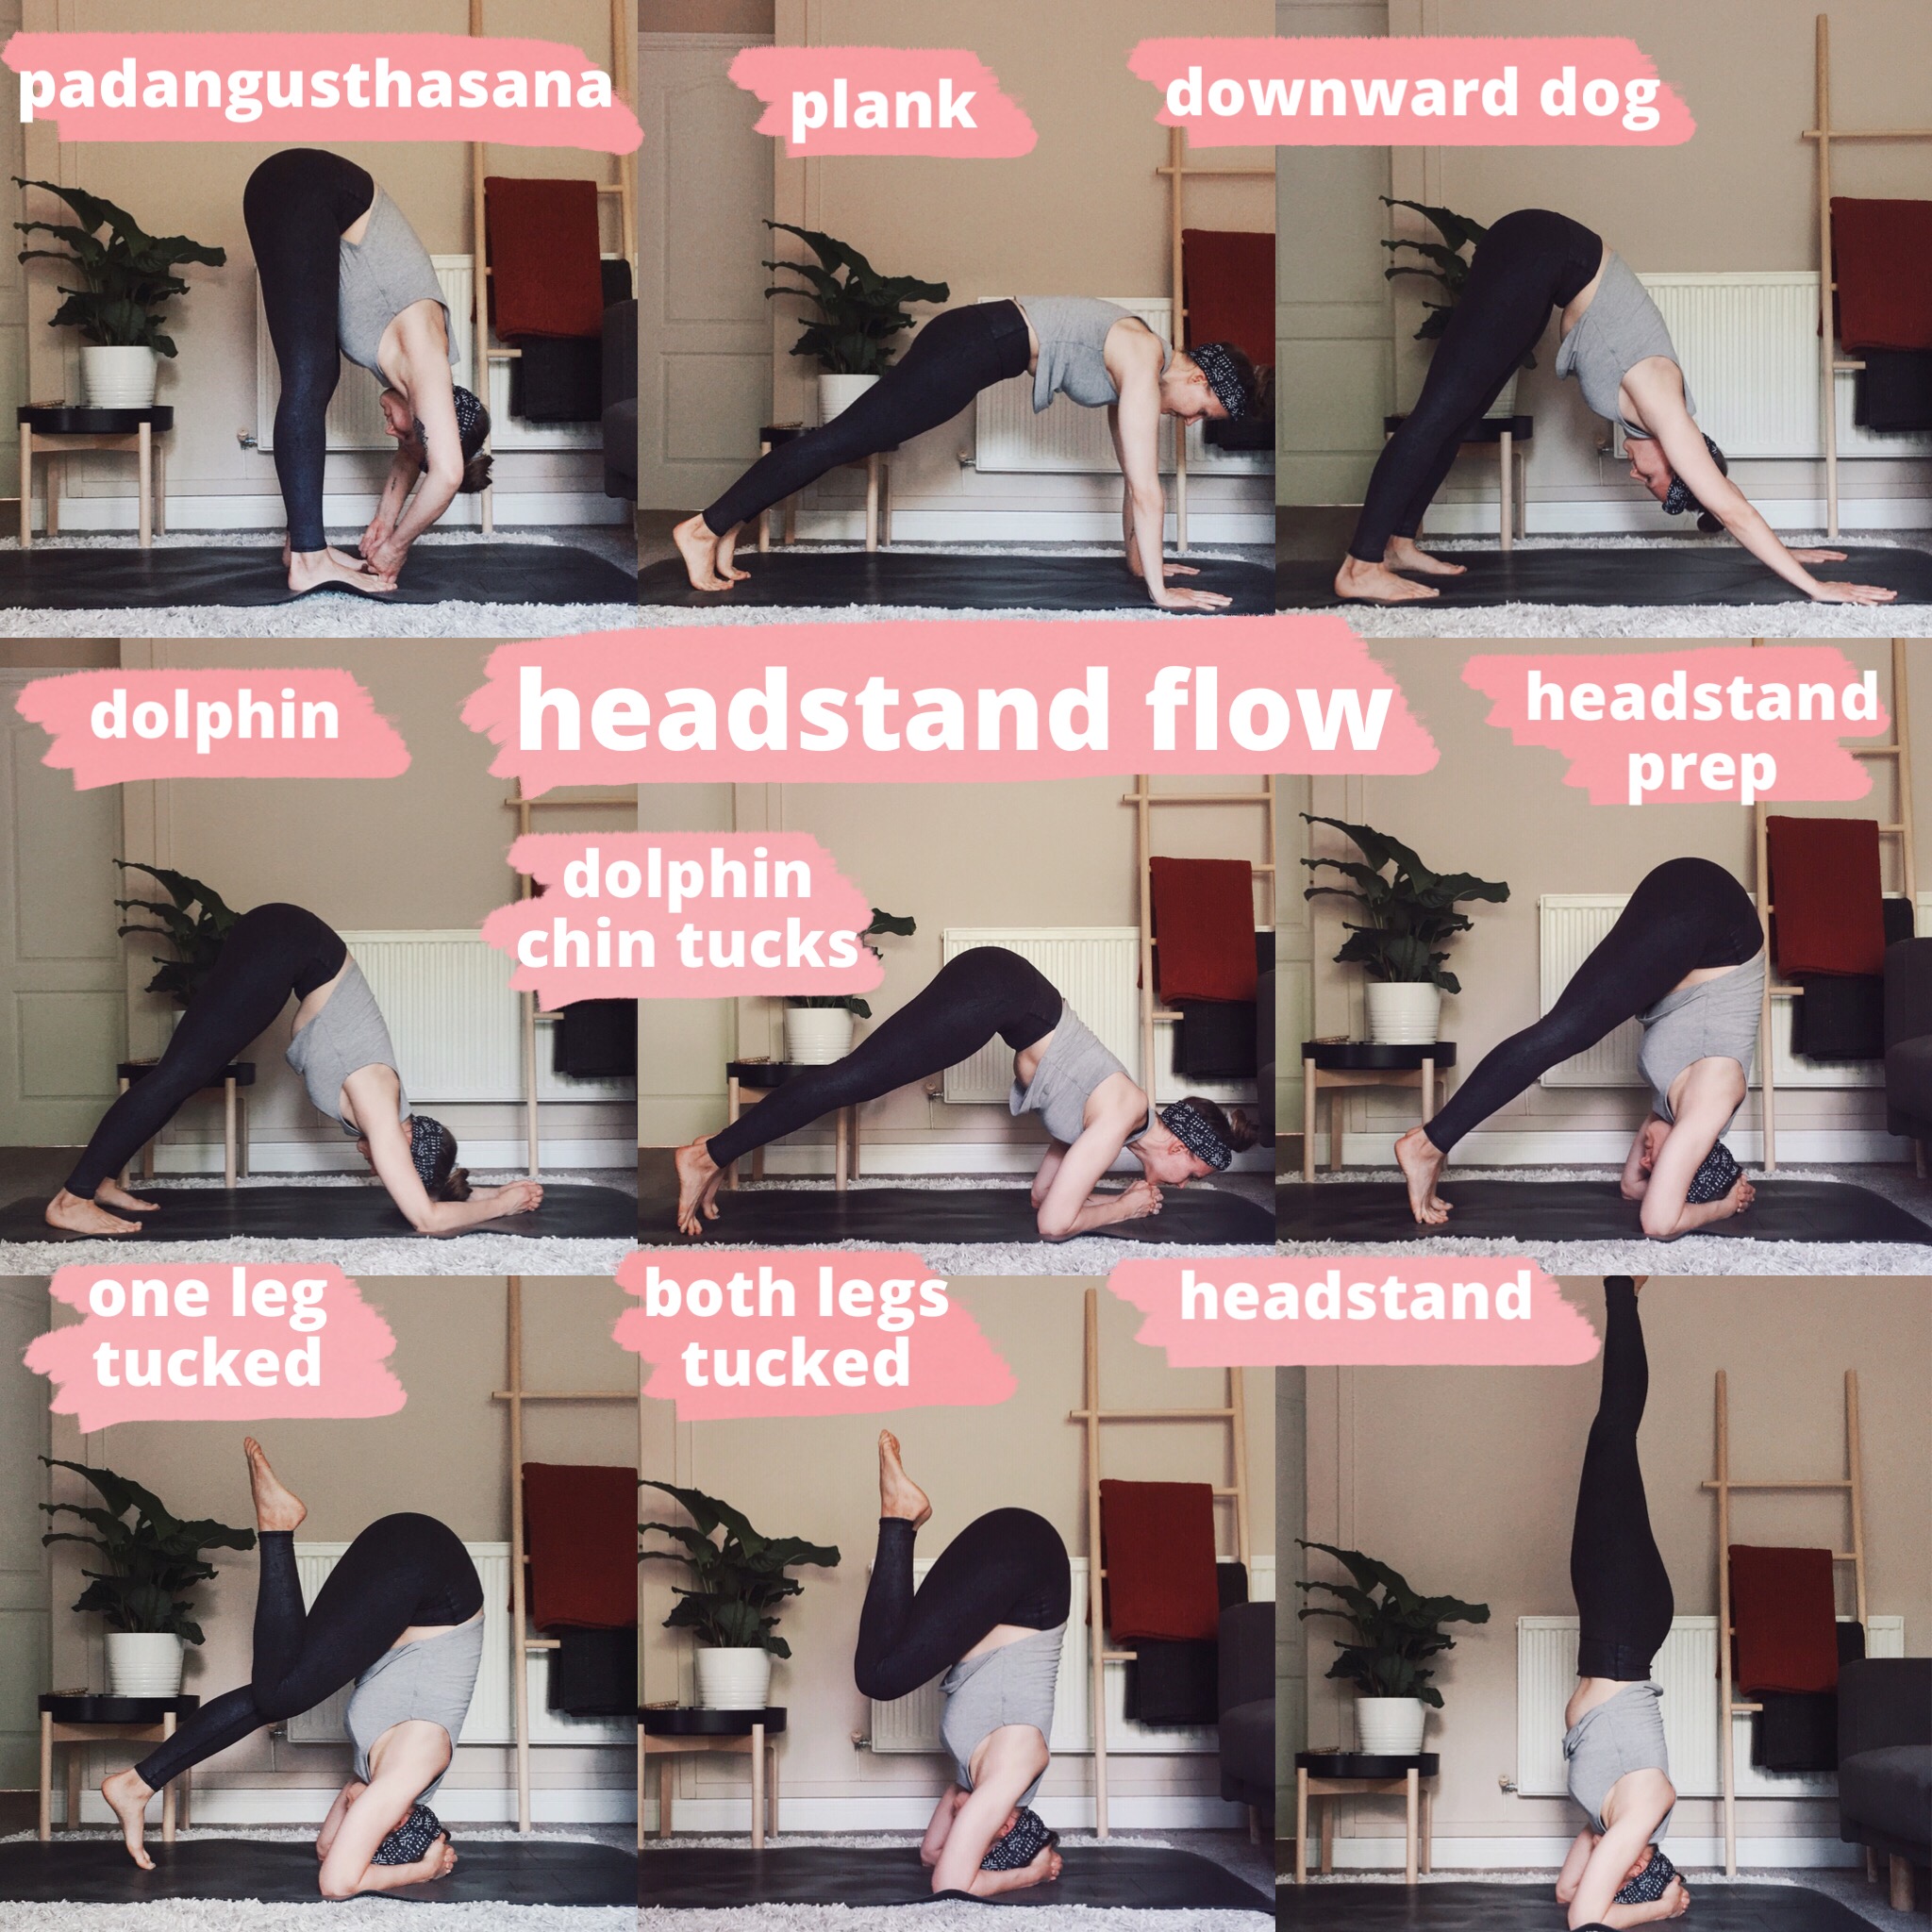 Headstand Flow - A few yoga poses to get you upside down! - SajaRut Yoga